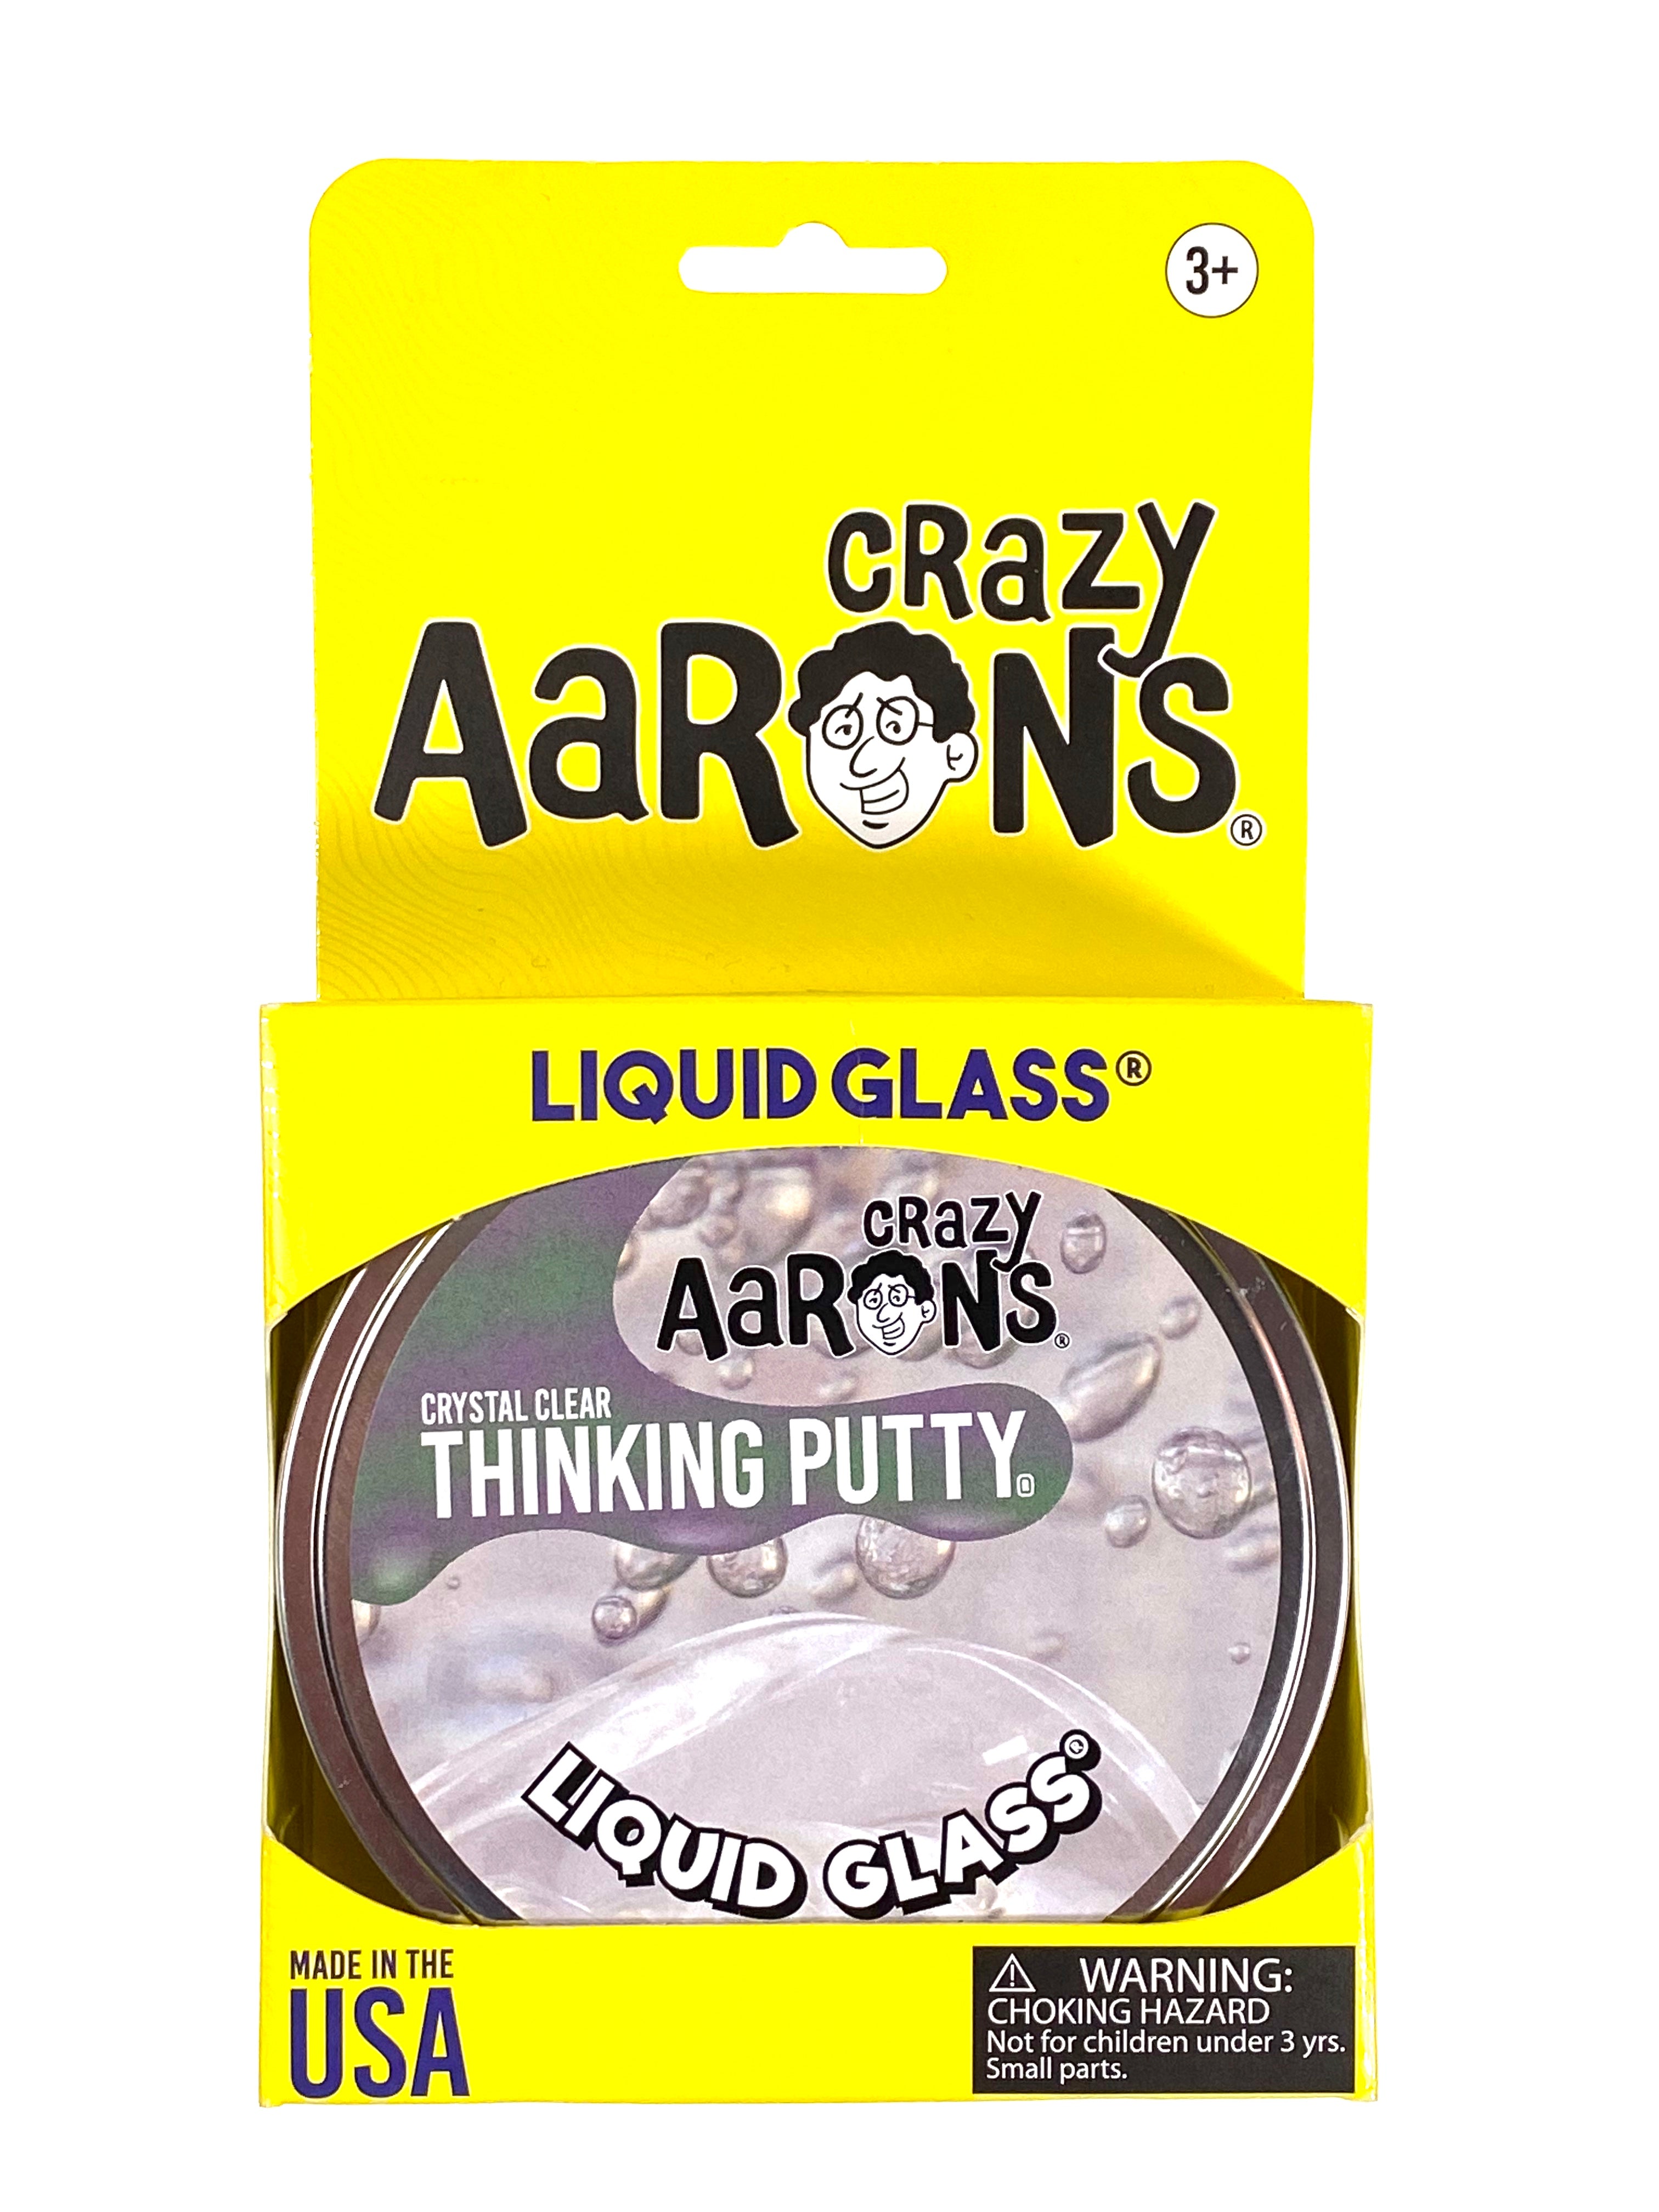  Crazy Aaron's Transparent Thinking Putty - 4 Falling